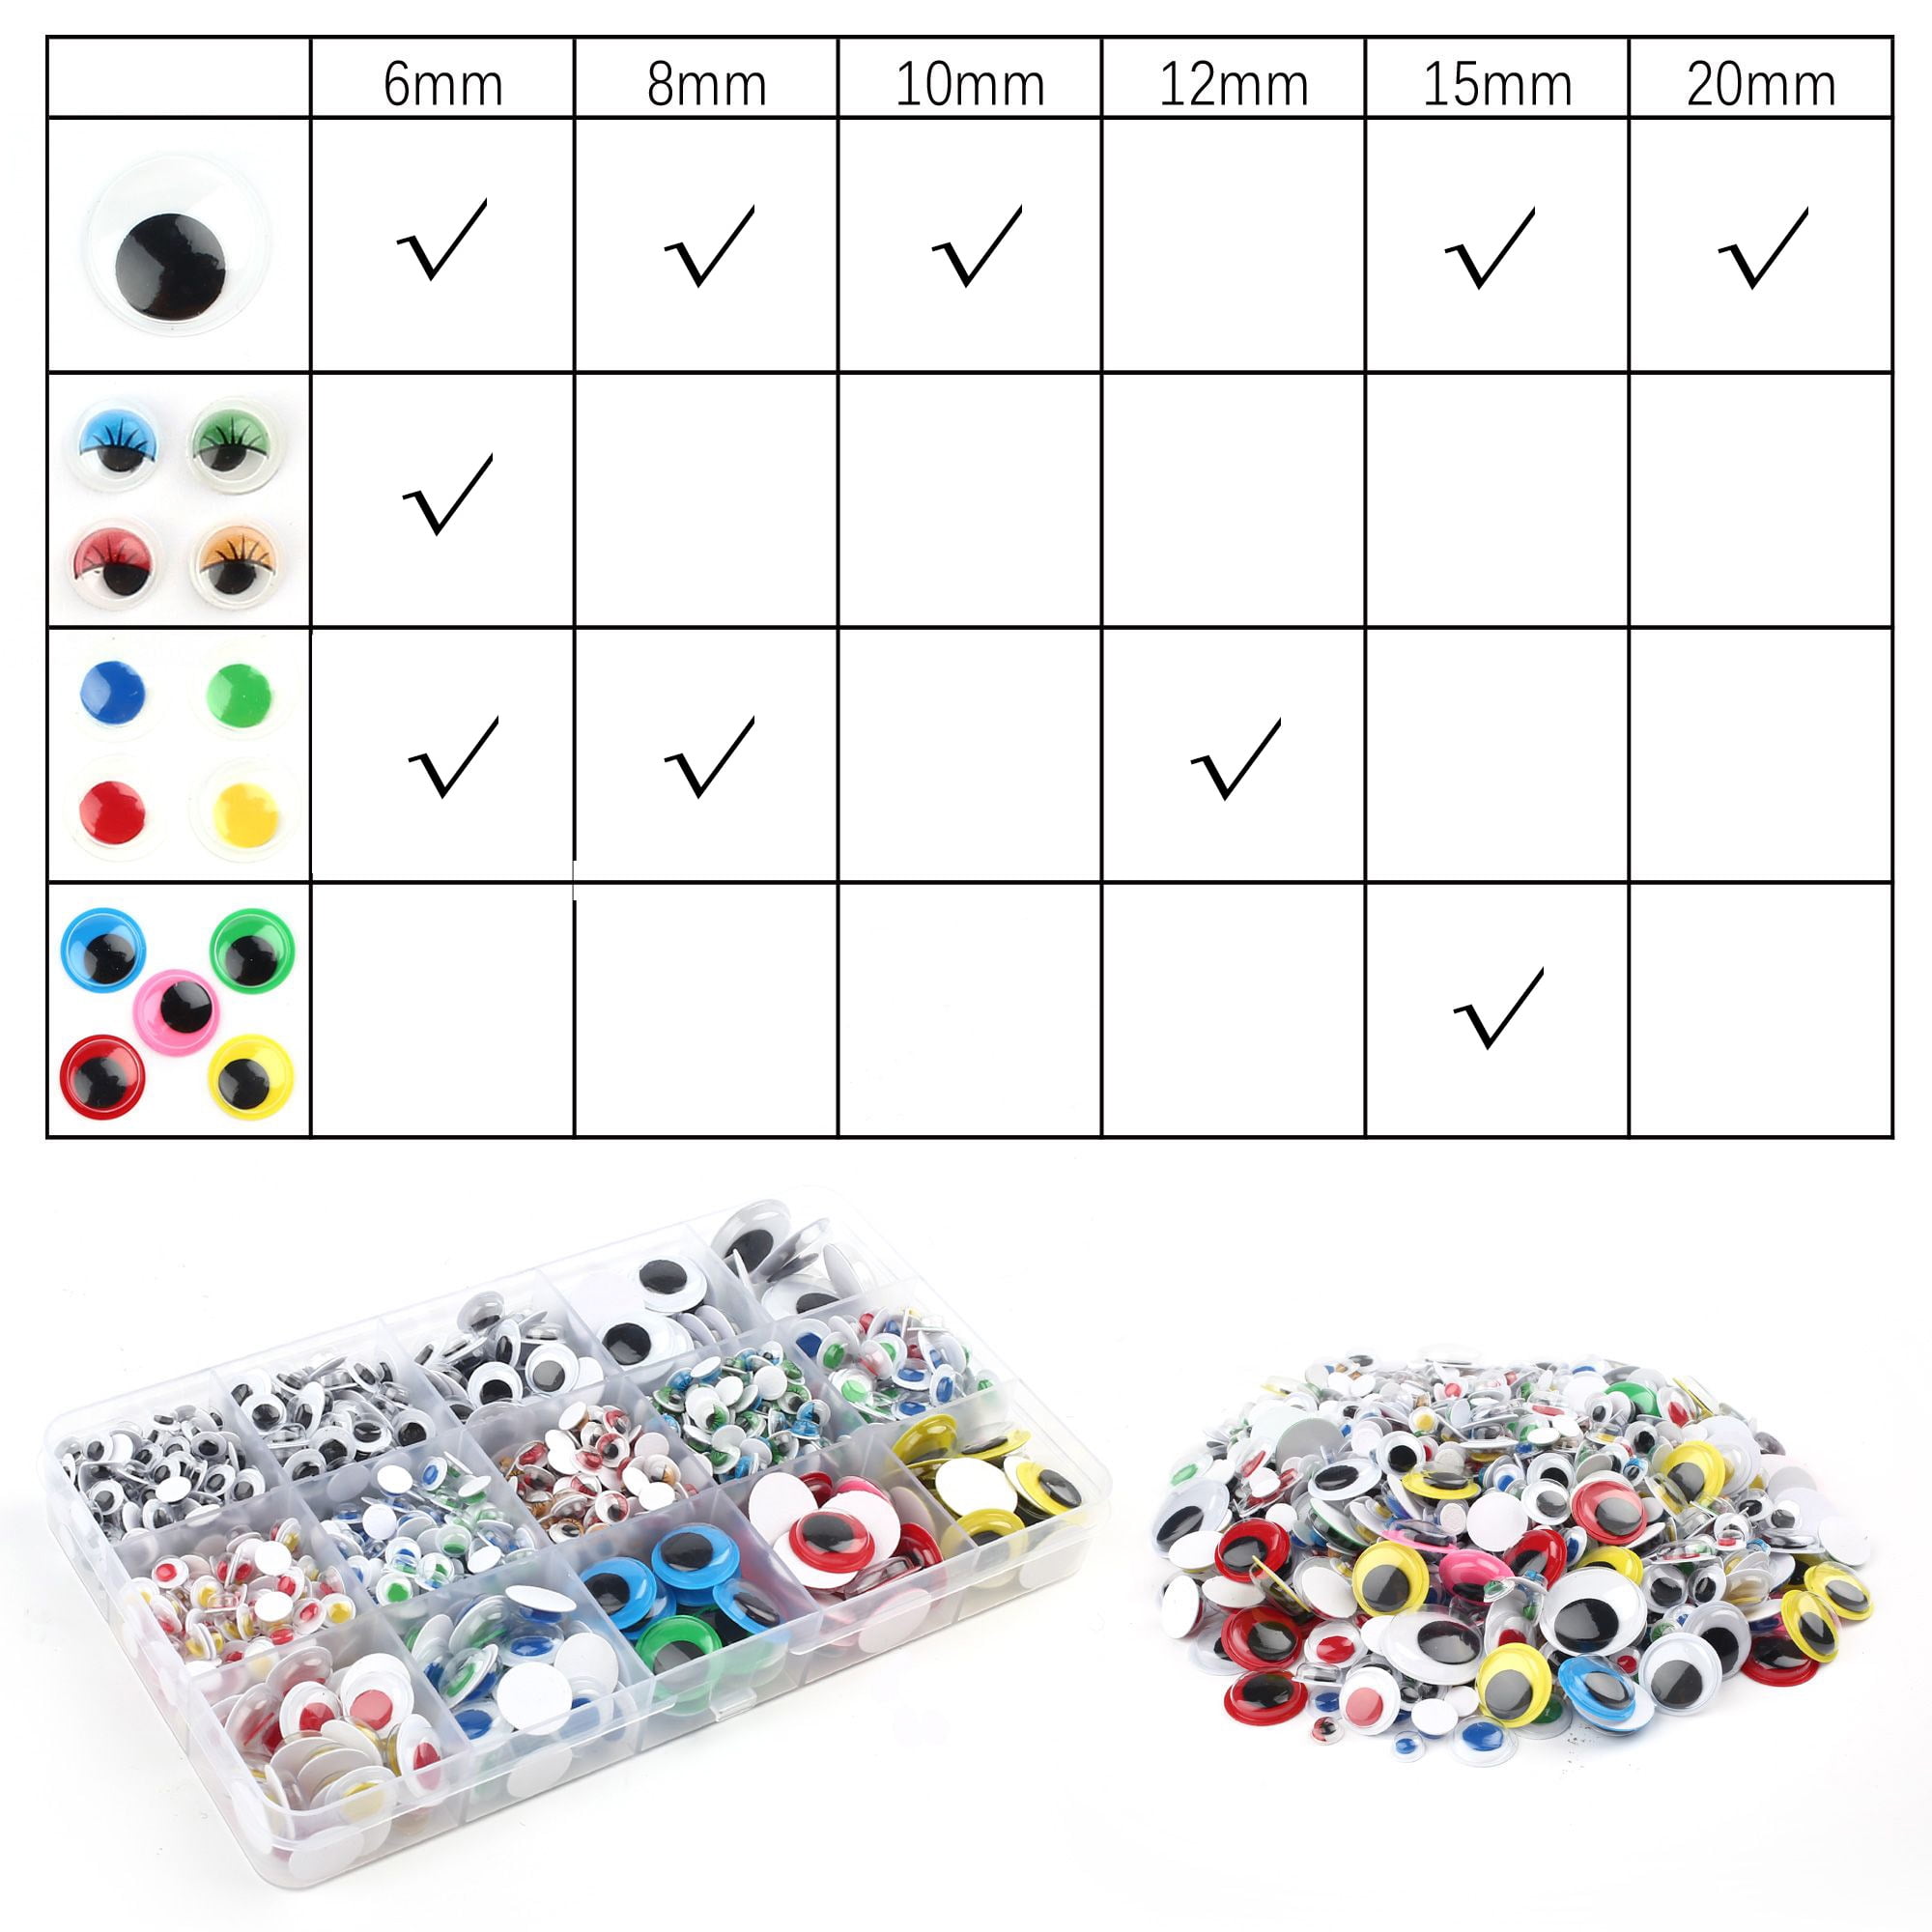 TOAOB 200pcs Glow in The Dark Wiggle Googly Eyes Self Adhesive Luminous  Googly Eyes Assorted Sizes Plastic Sticker Eyes for DIY Crafts Scrapbooking